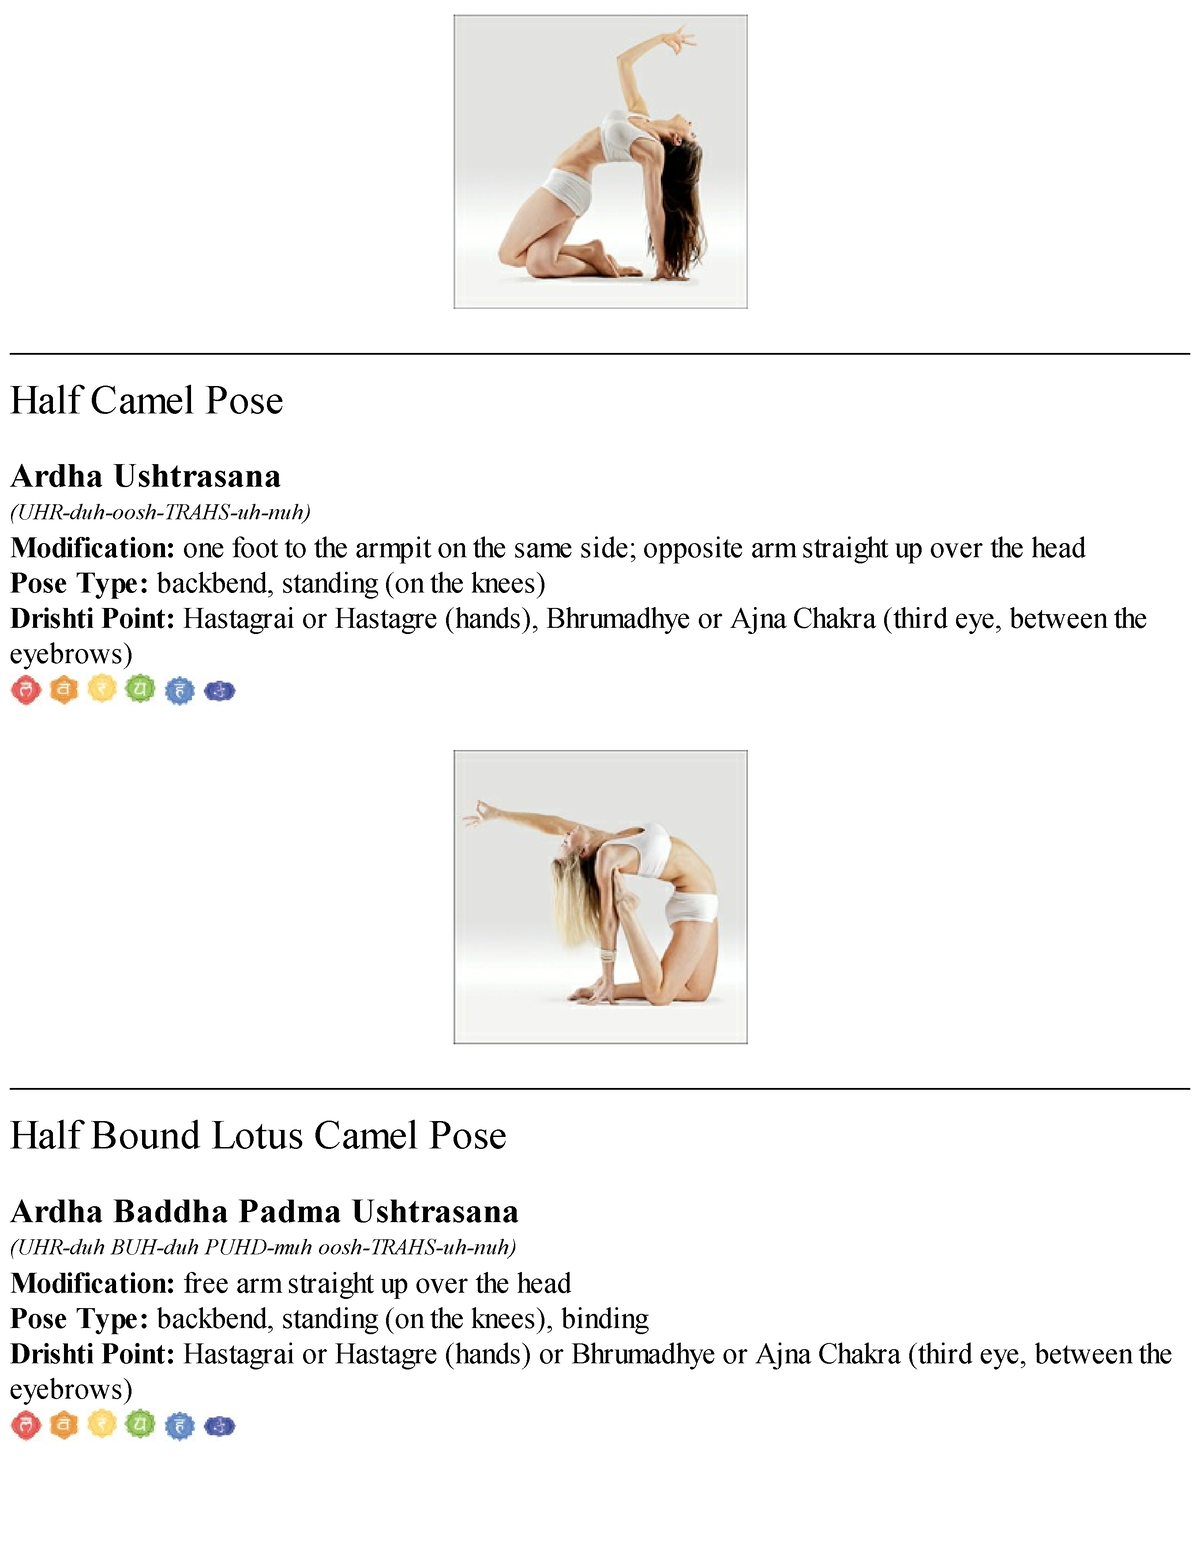 Yoga Poses for Better Posture and to Relieve Neck Pain